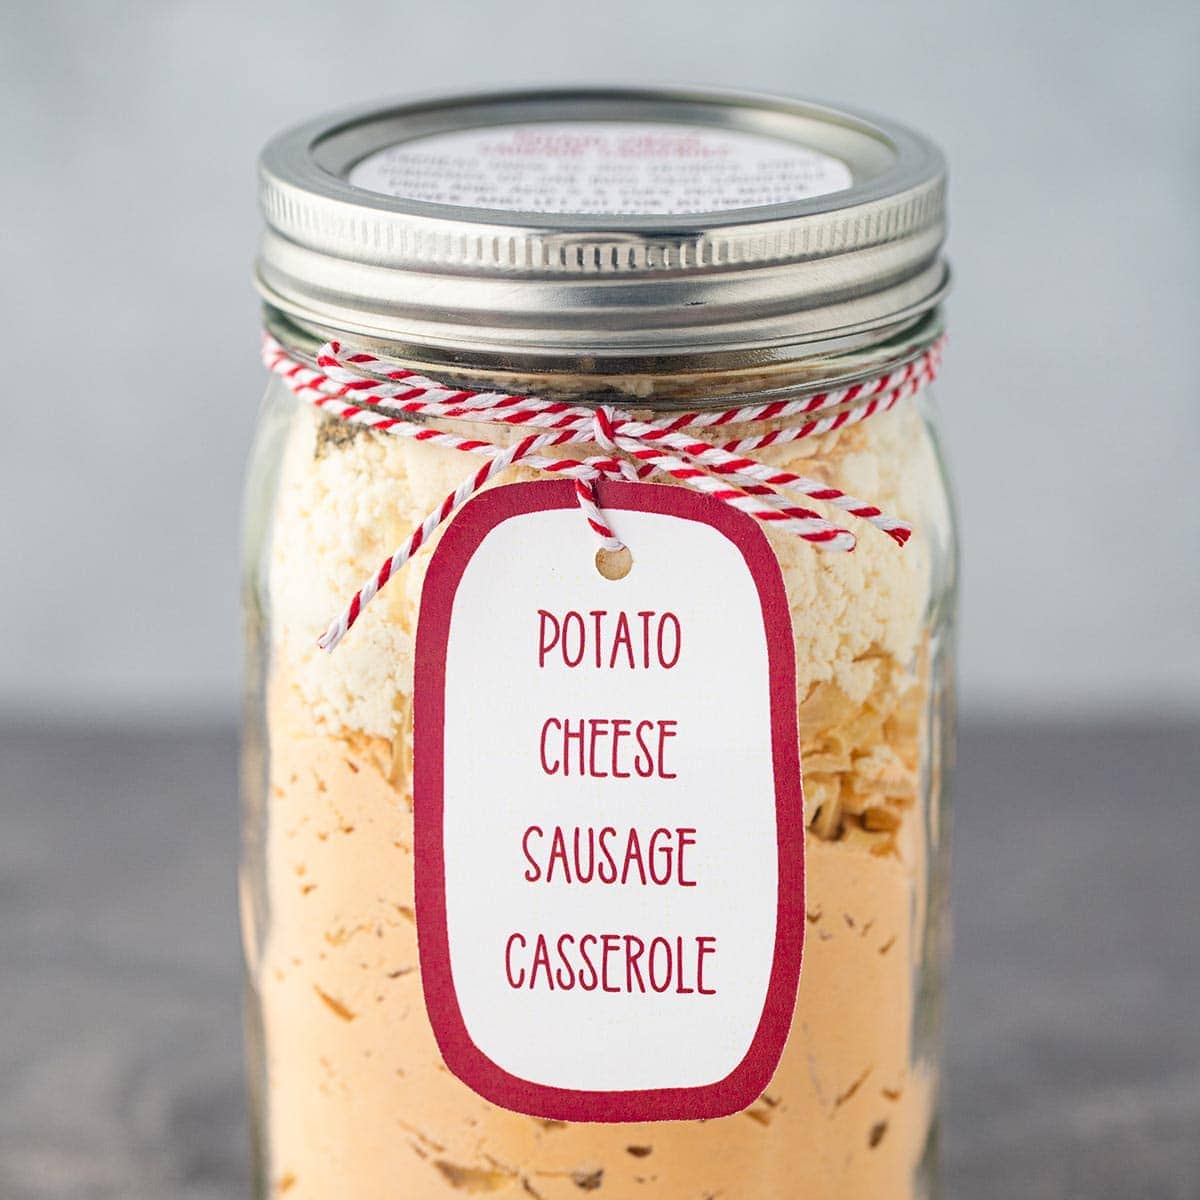 Cropped shot showing quart mason jar filled with the dry ingredients for making Potato Cheese Casserole as a shelf-stable meal in a jar.